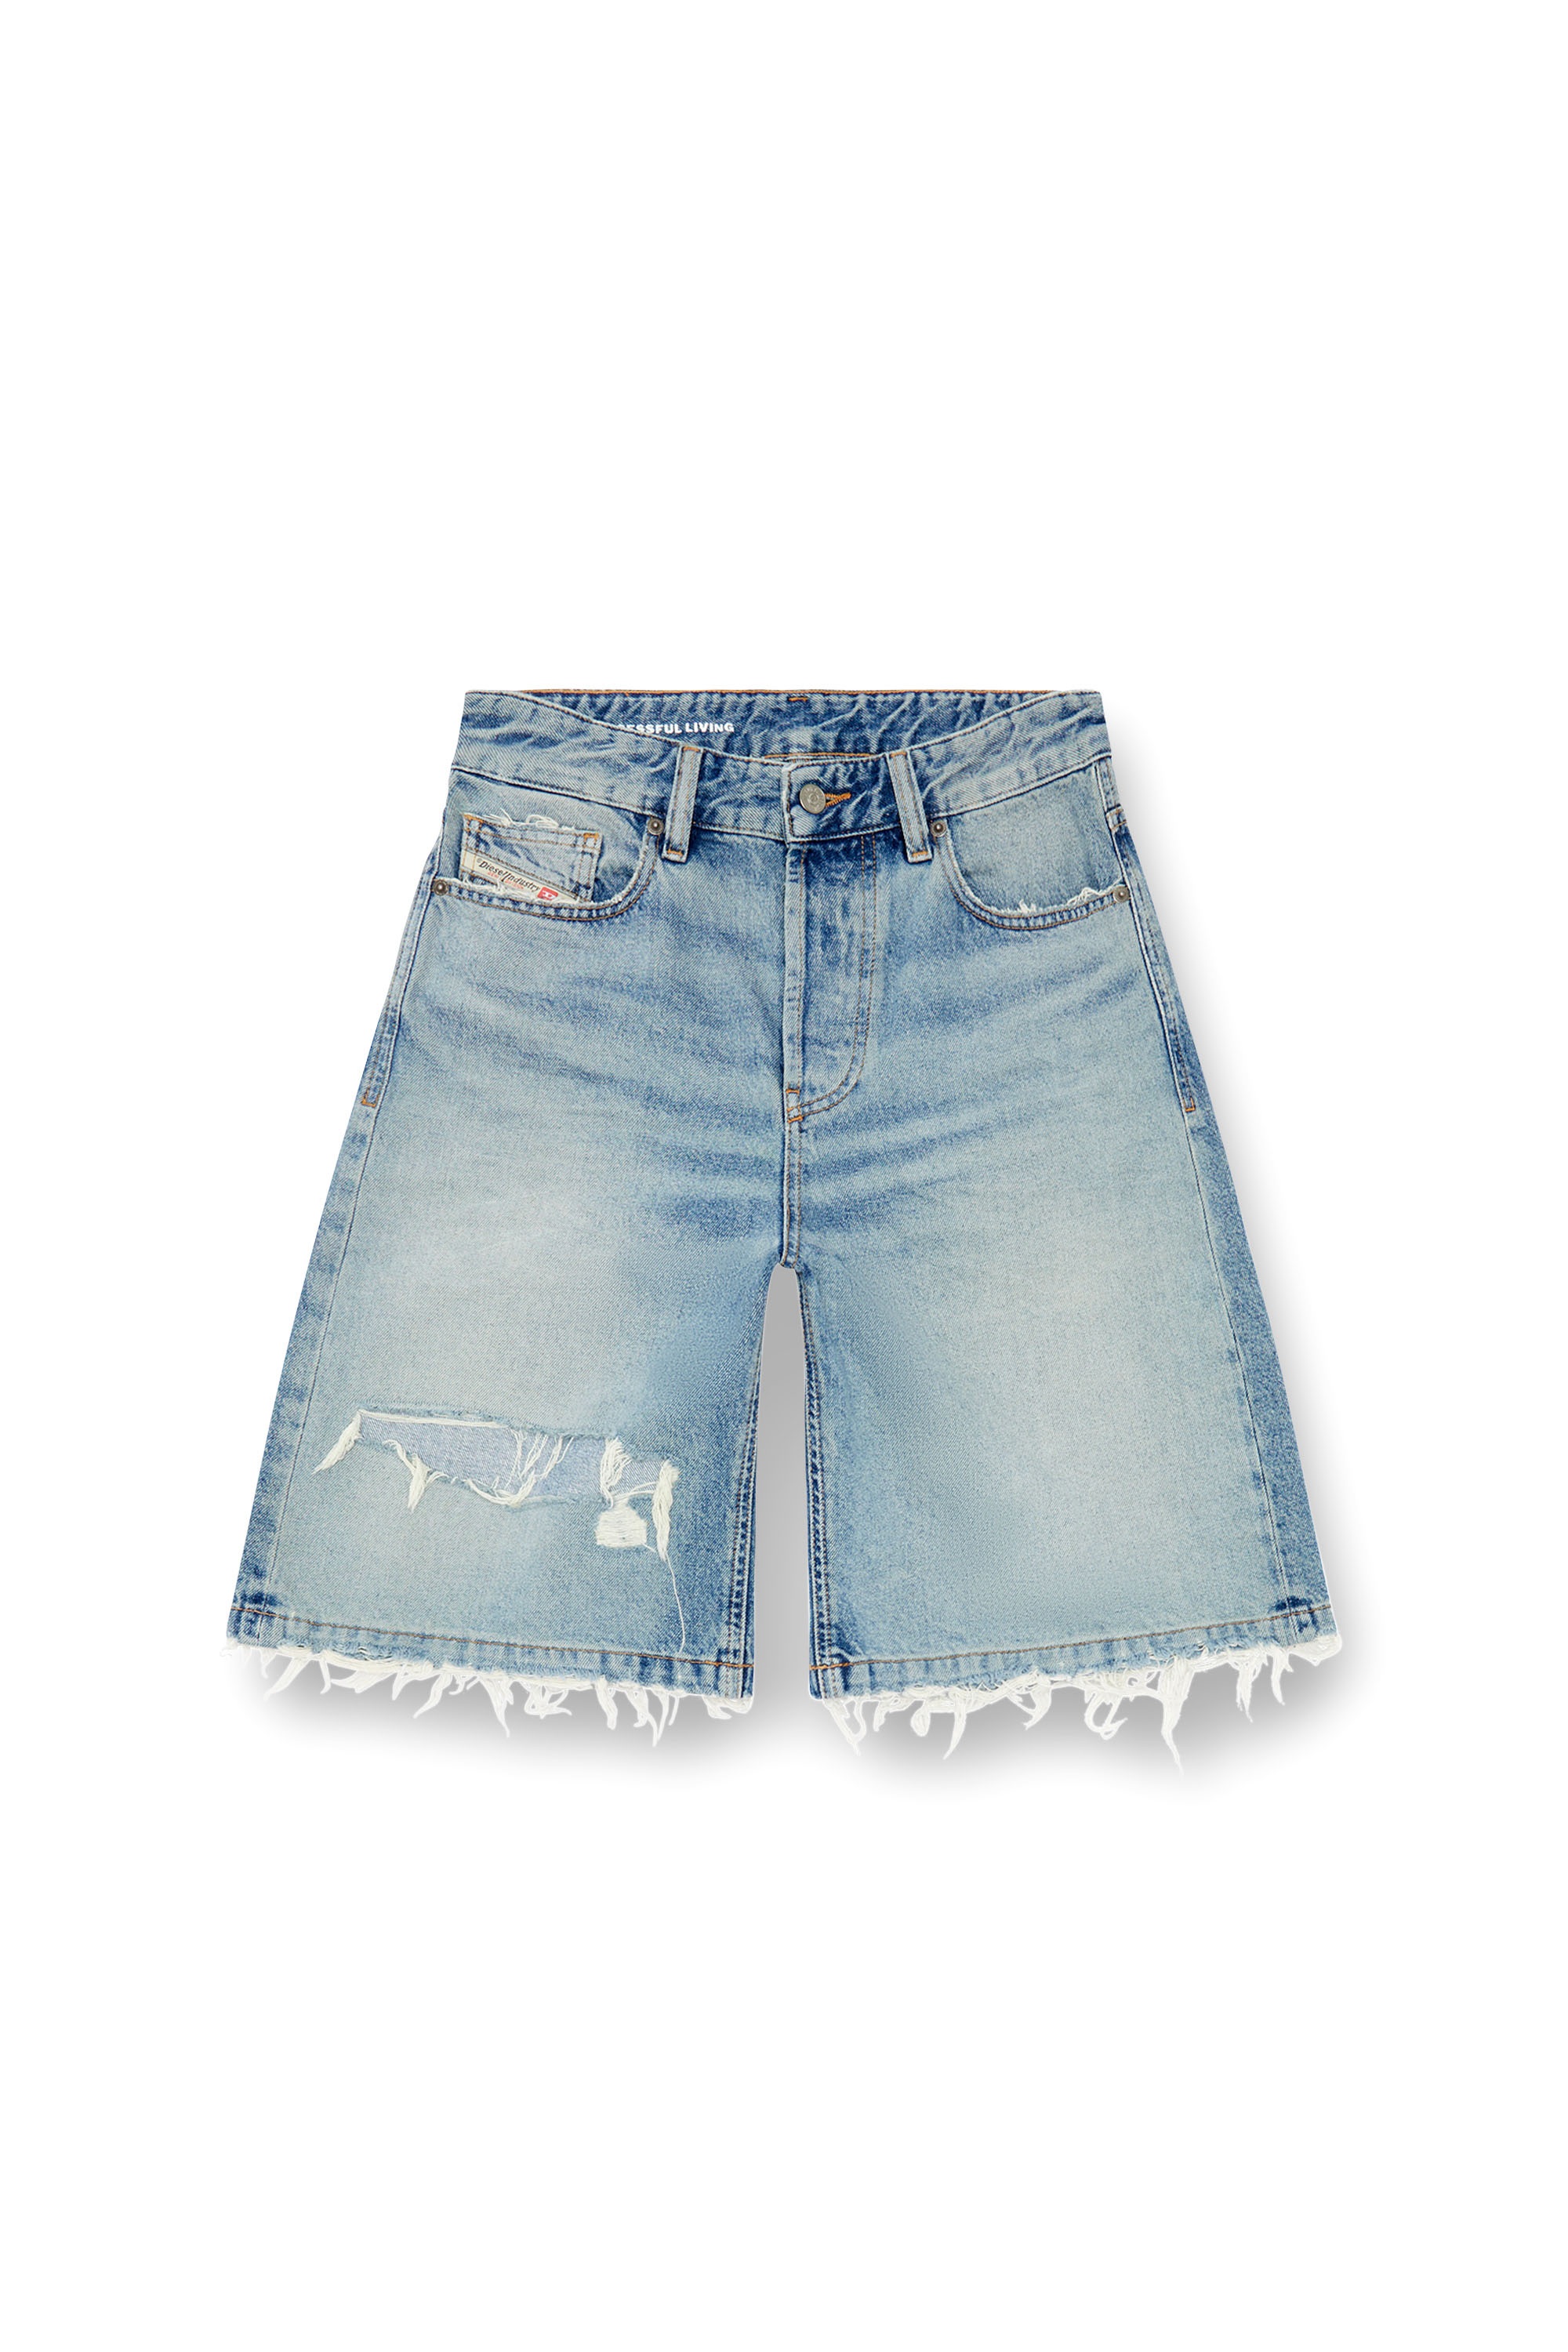 Diesel - DE-SIRE-SHORT, Donna Short in denim ripped and repaired in Blu - Image 1